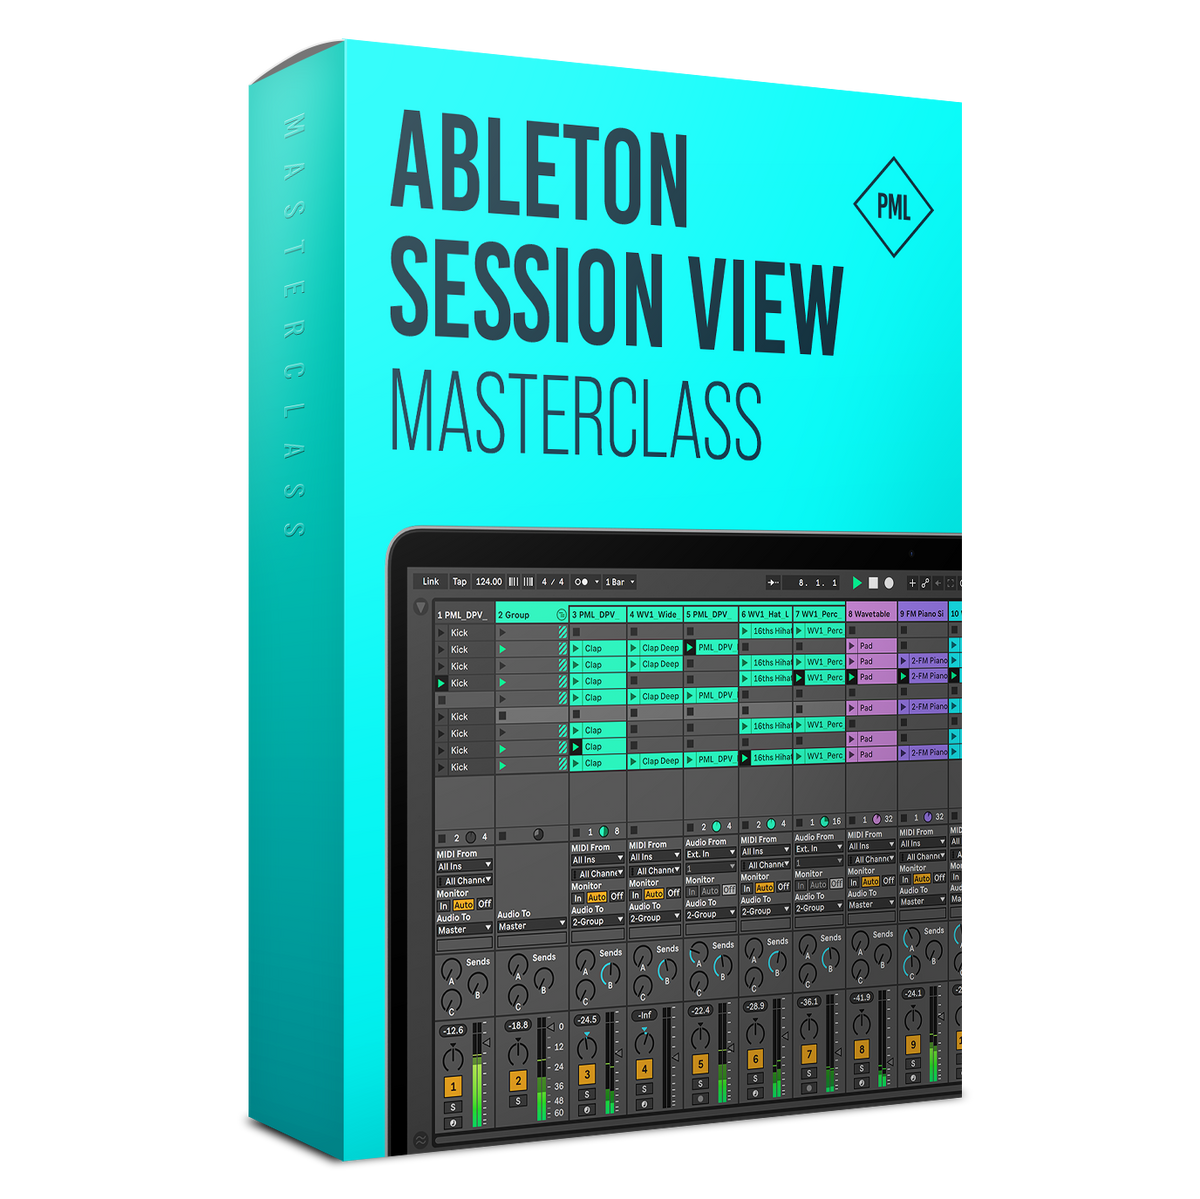 Ableton Session View Masterclass Product Box